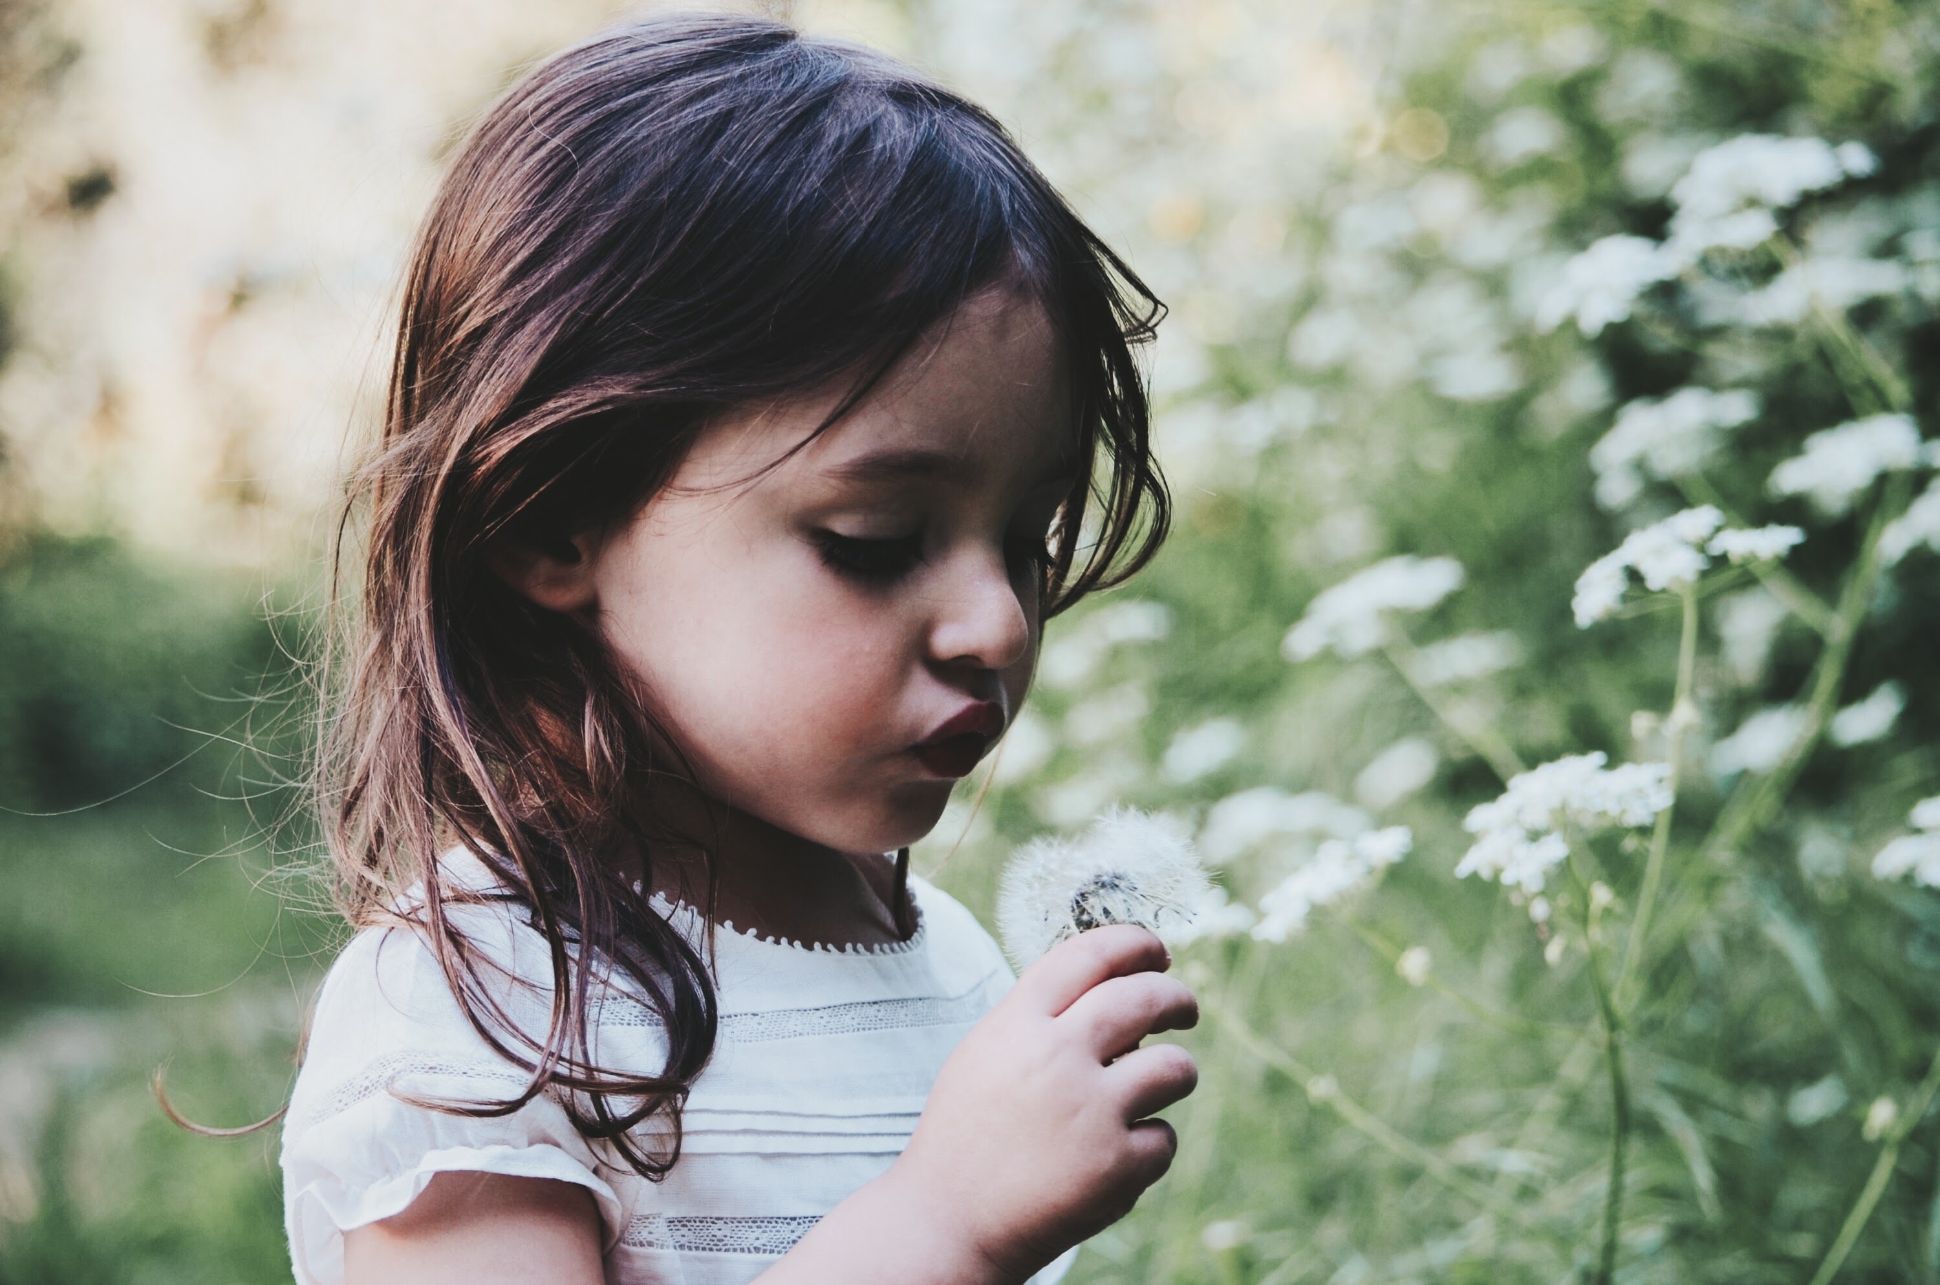 Young child blowing dandelion.